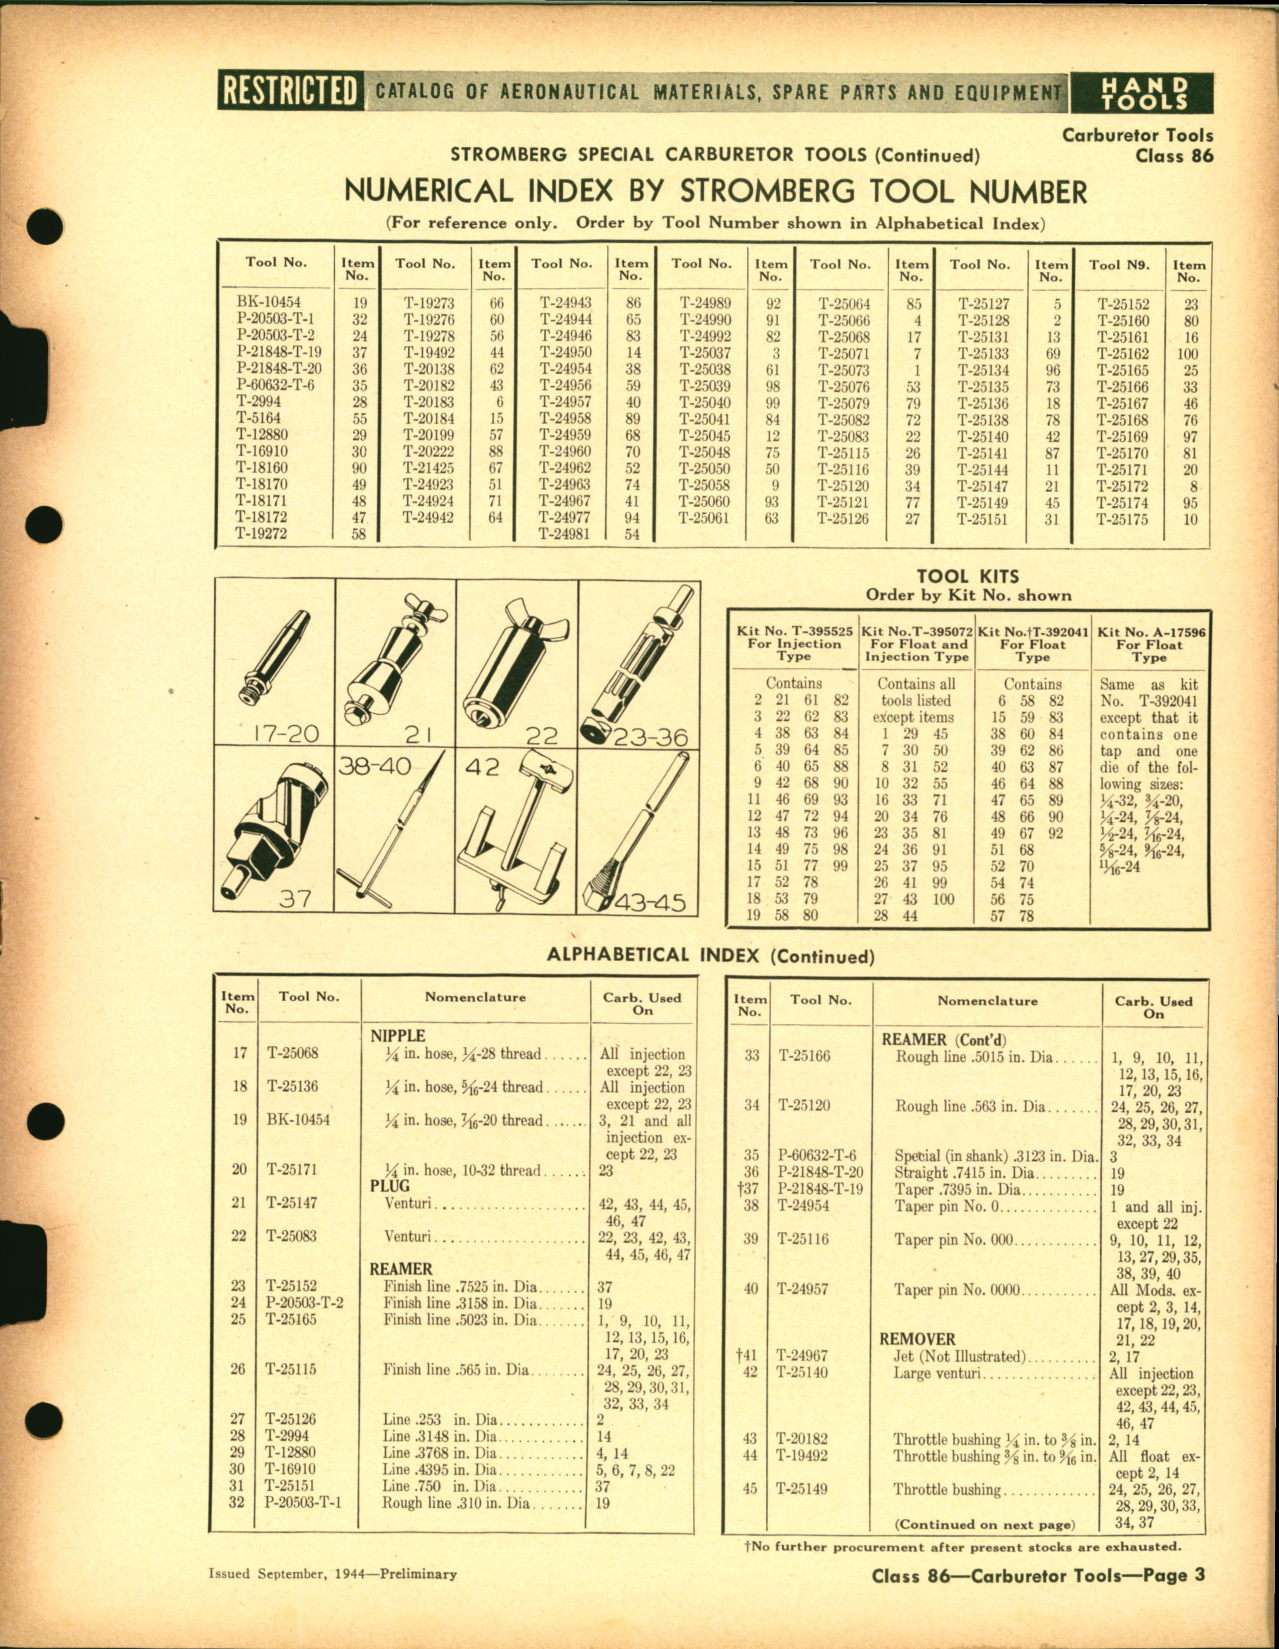 Sample page 3 from AirCorps Library document: Carburetor and Spark Plug Tools